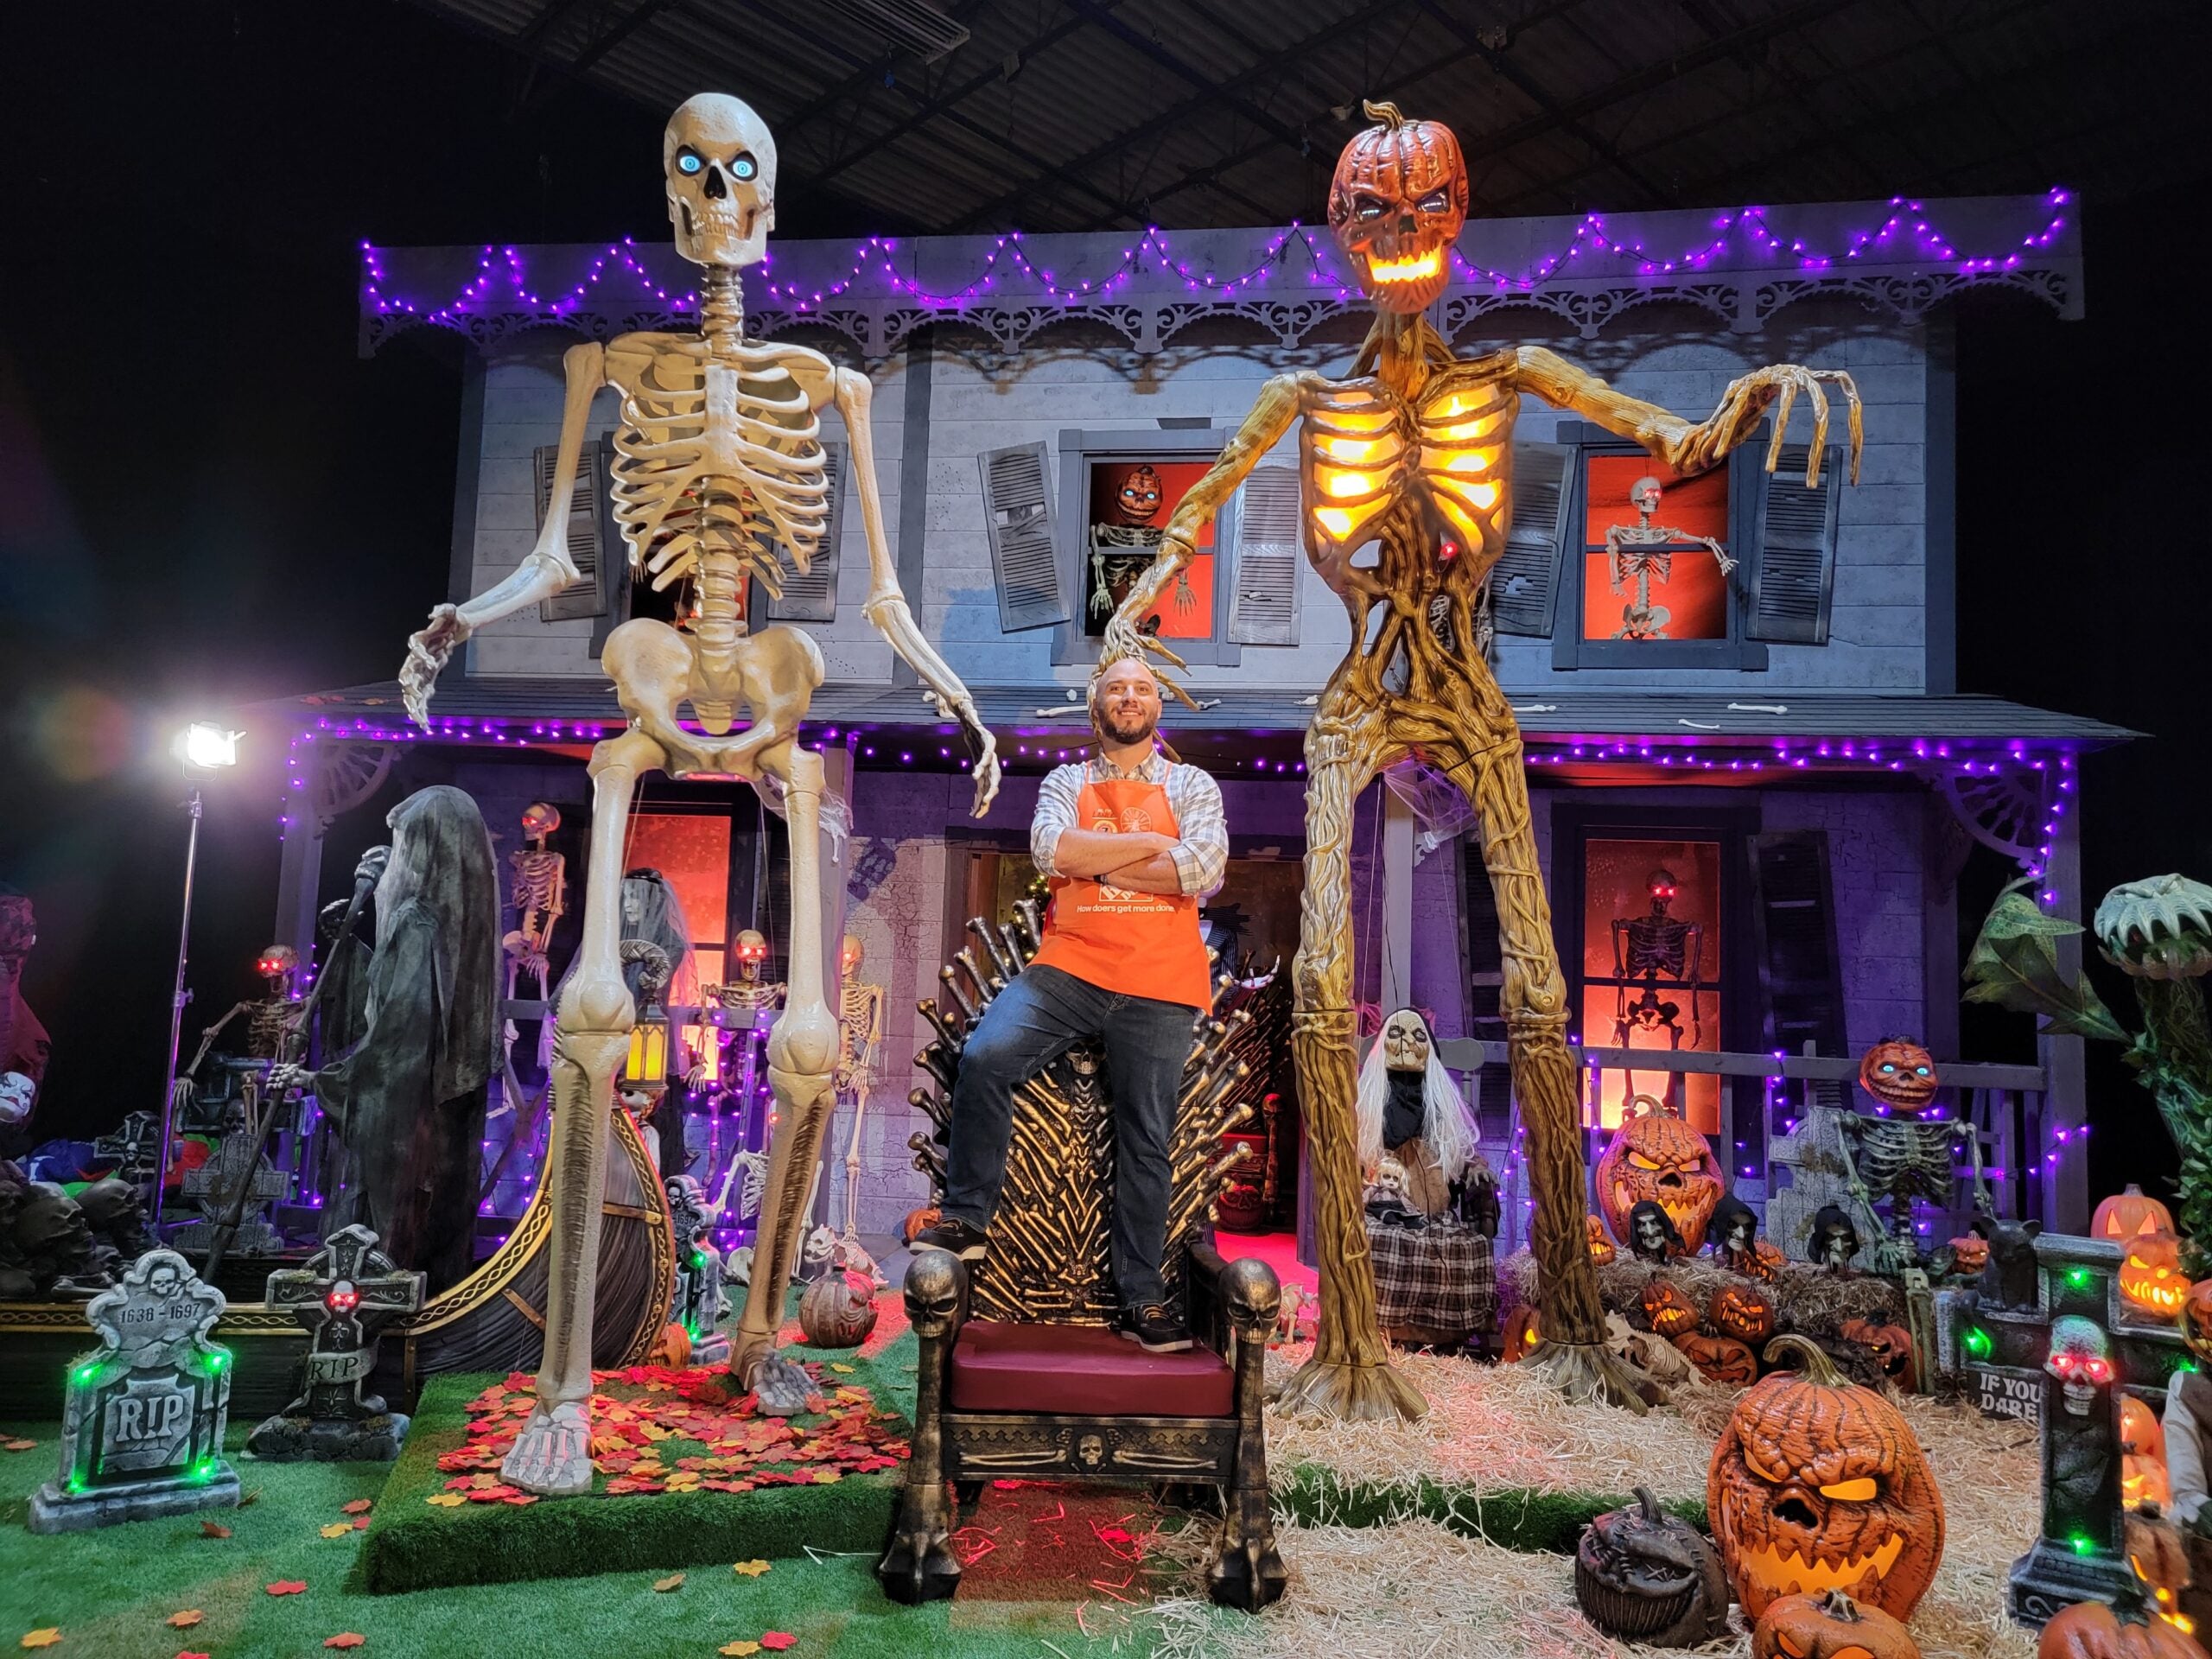 The giant Home Depot skeleton is helping raise money for St. Jude